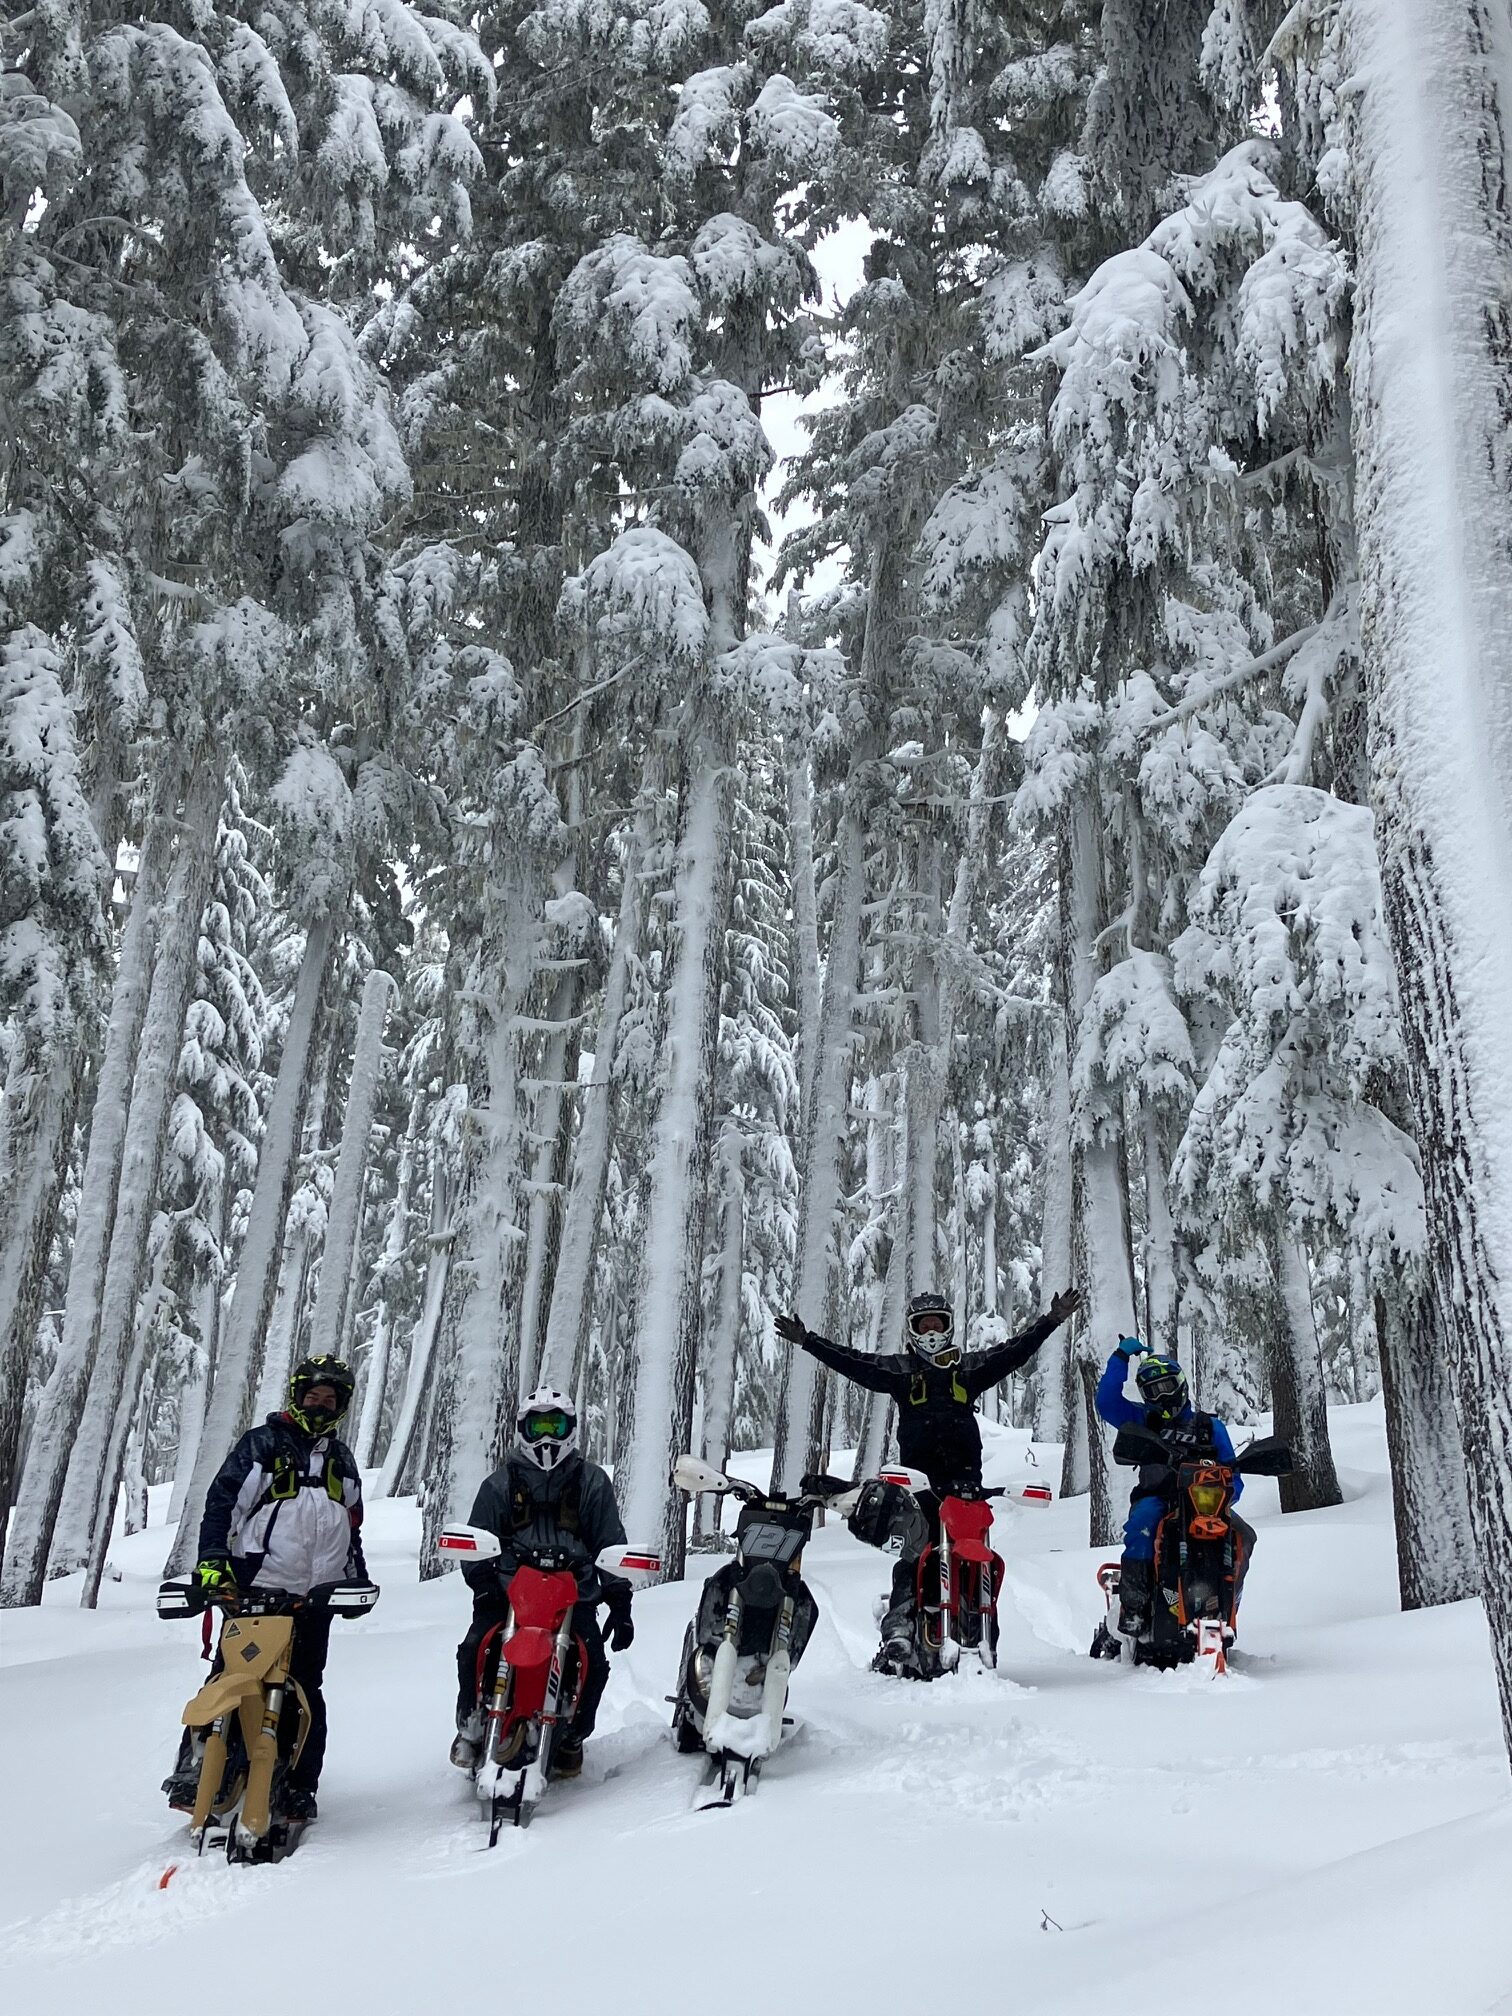 I rented a snow bike with Cascade Snow Bike and it was the best tour